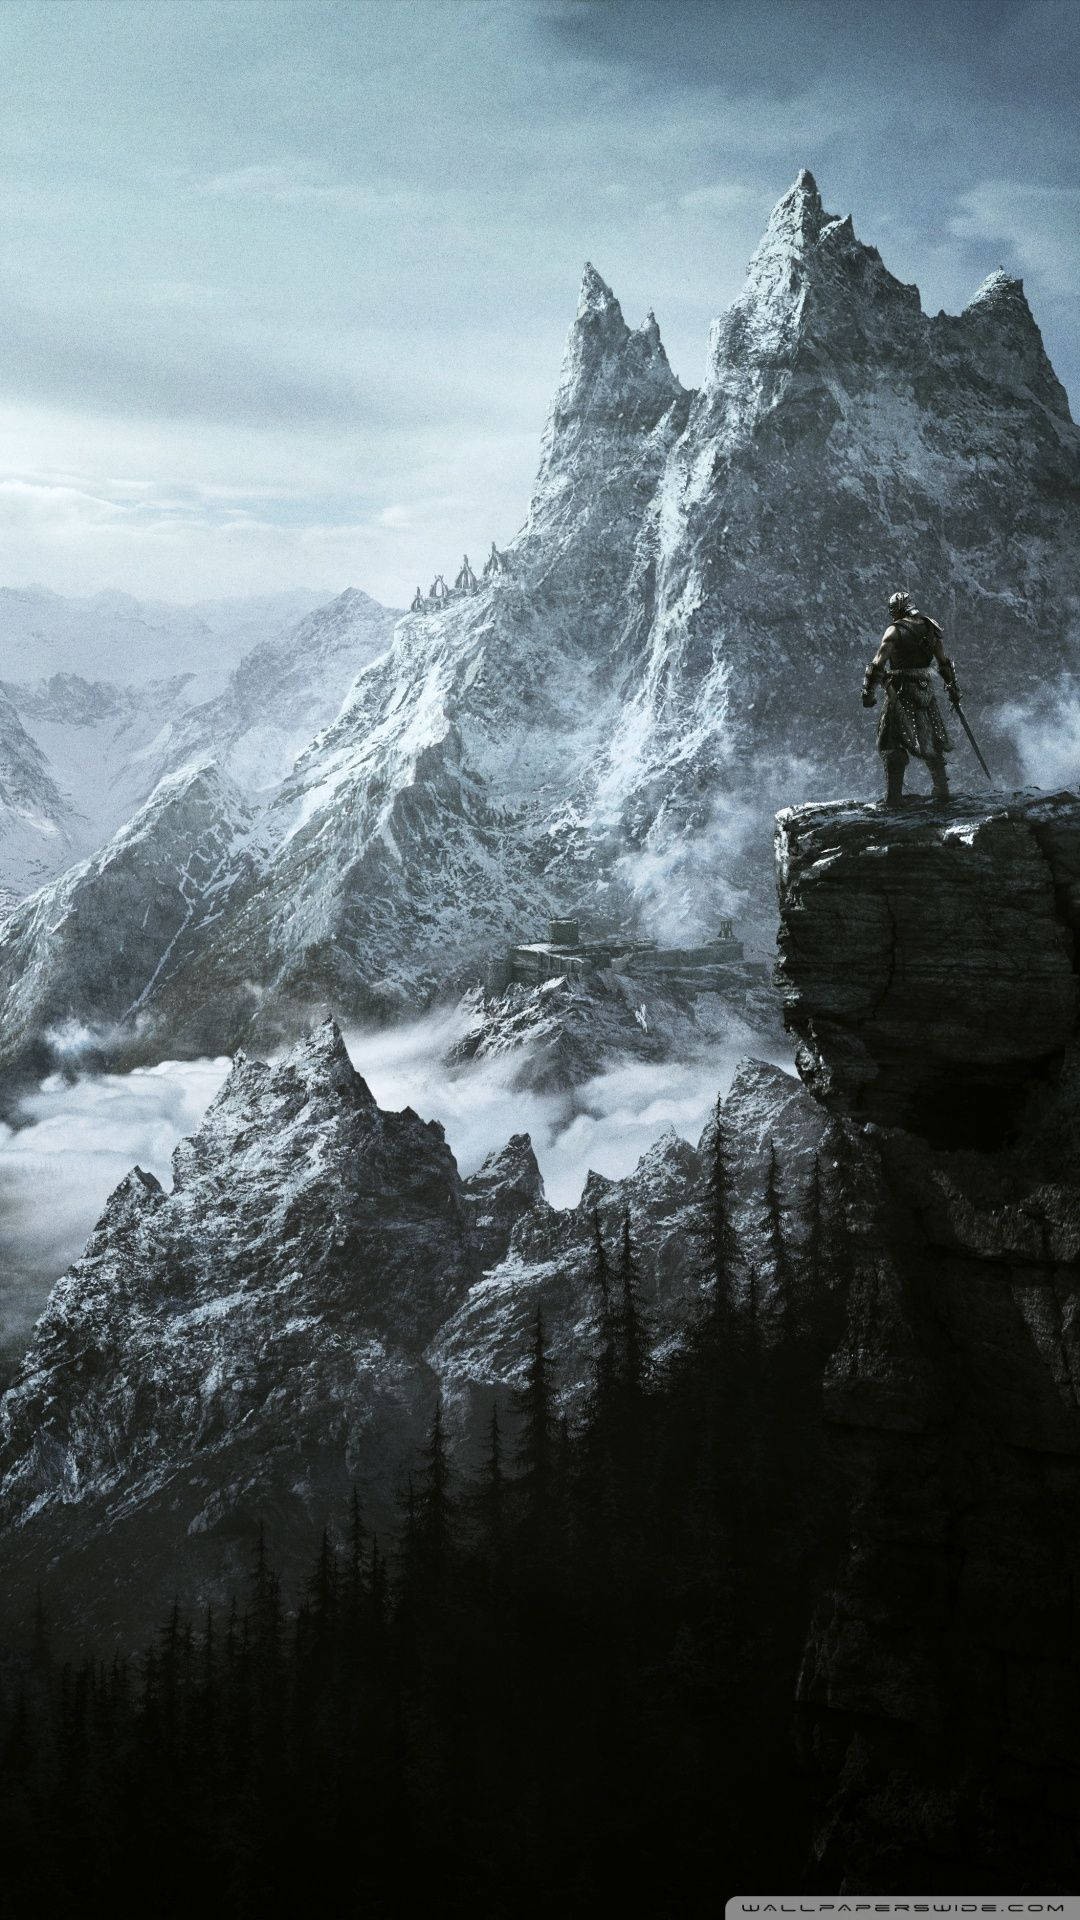 Travel the lands of Skyrim with the official Skyrim Phone Wallpaper